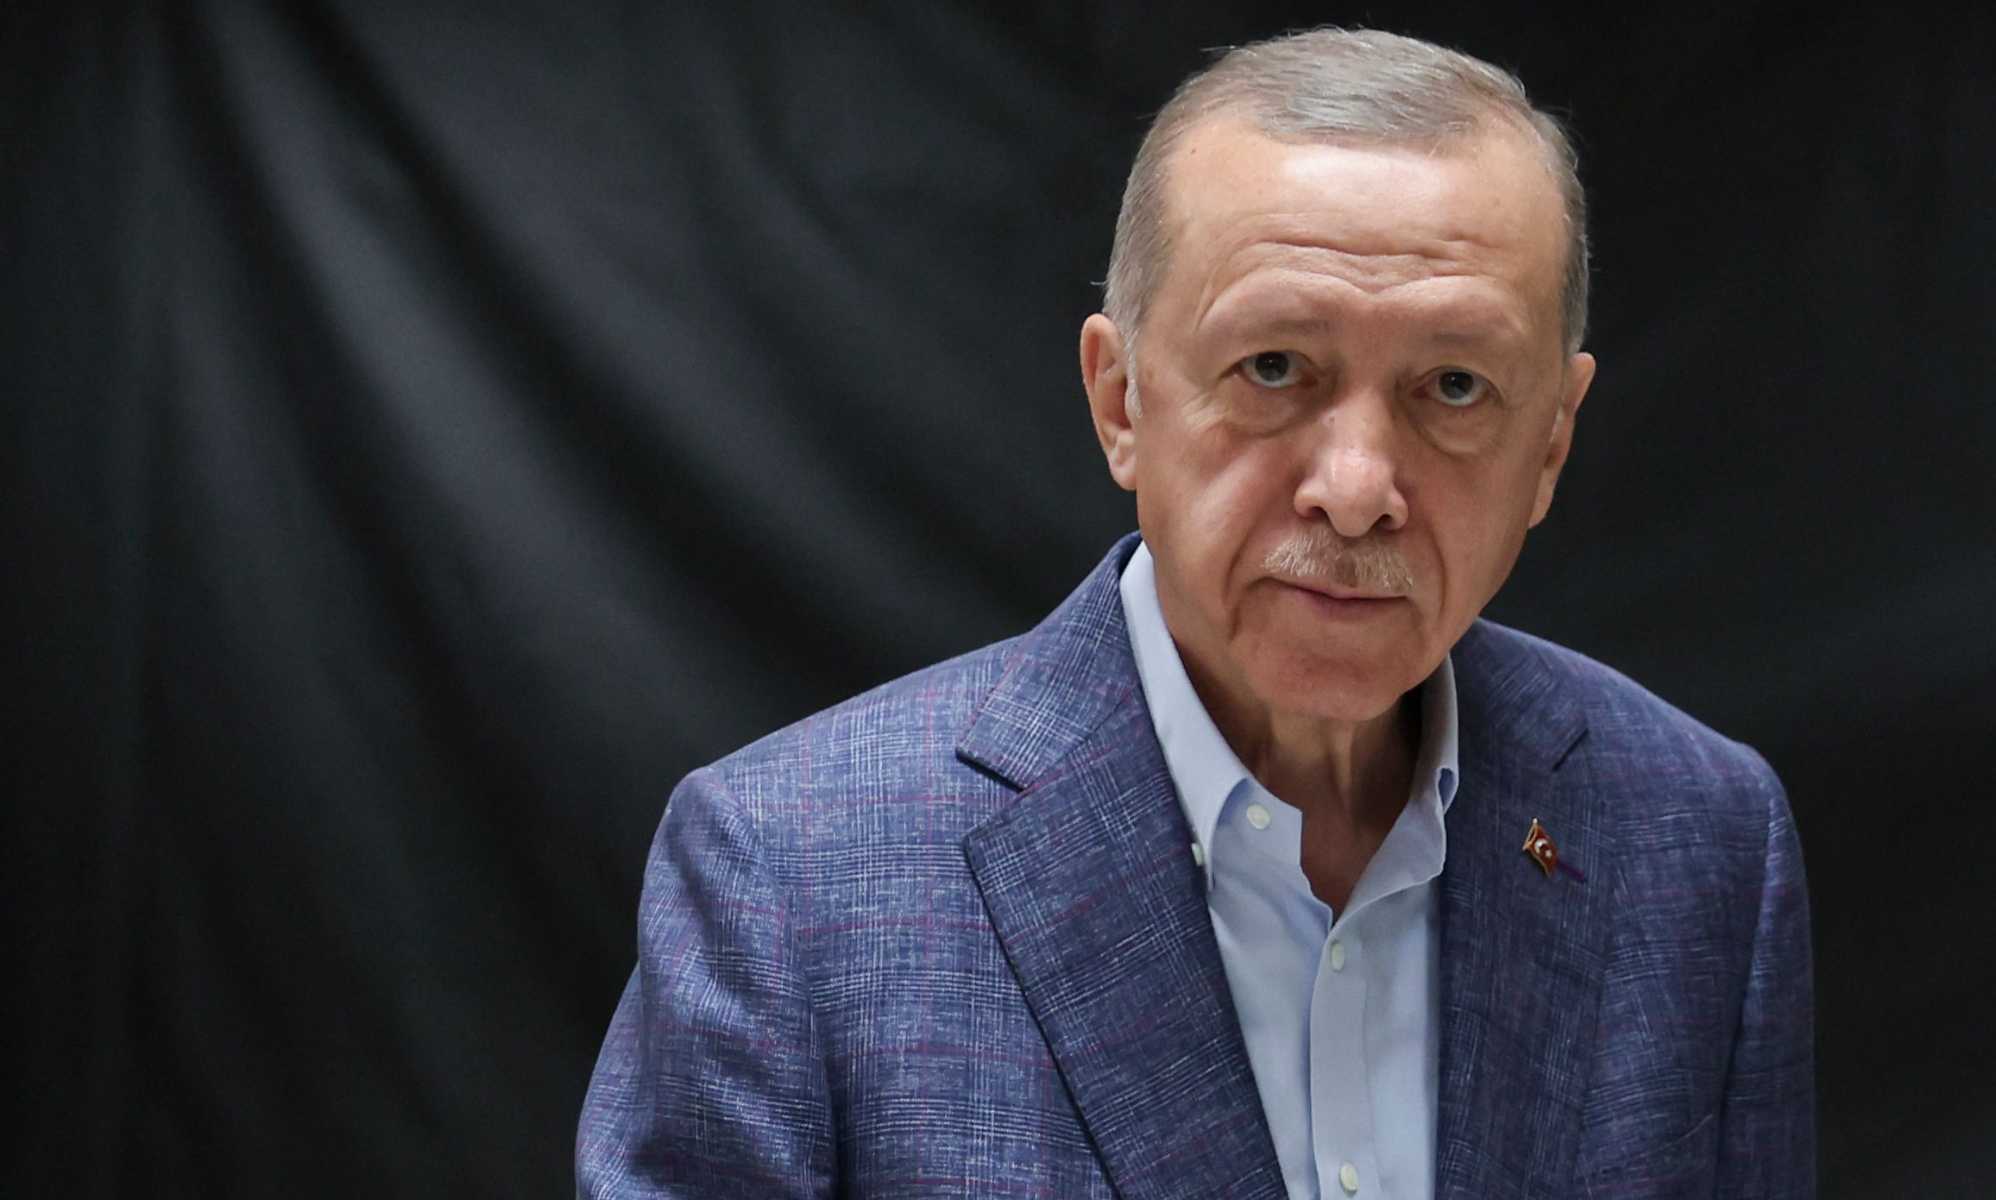 Turkey's Erdoğan takes aim at 'LGBT forces' after election victory